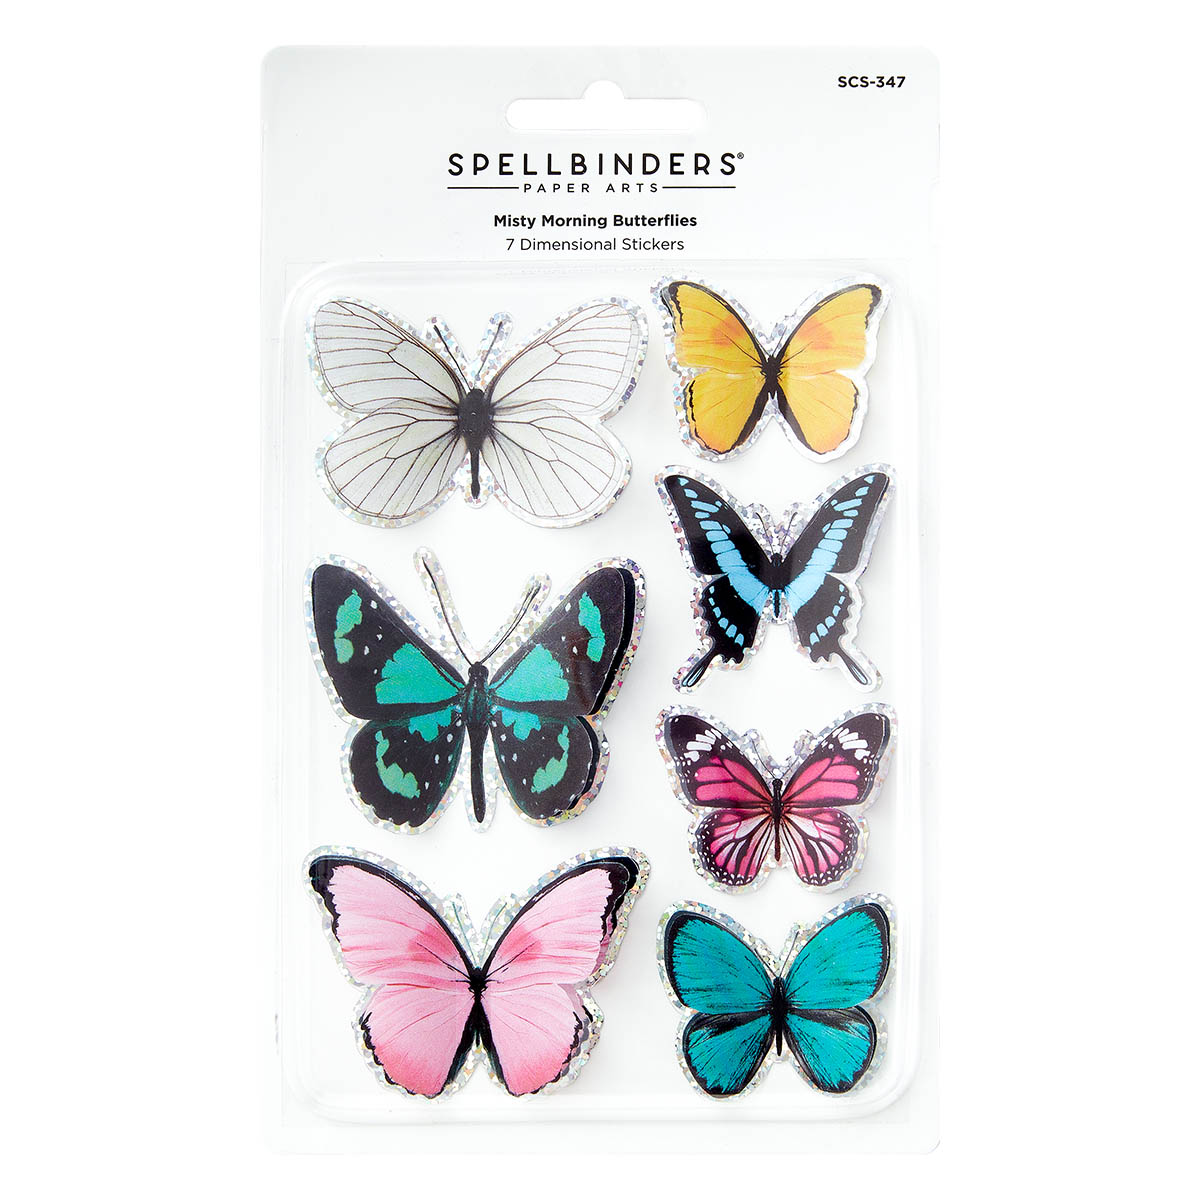 Spellbinders Misty Morning Butterflies Stickers From the Timeless Collection